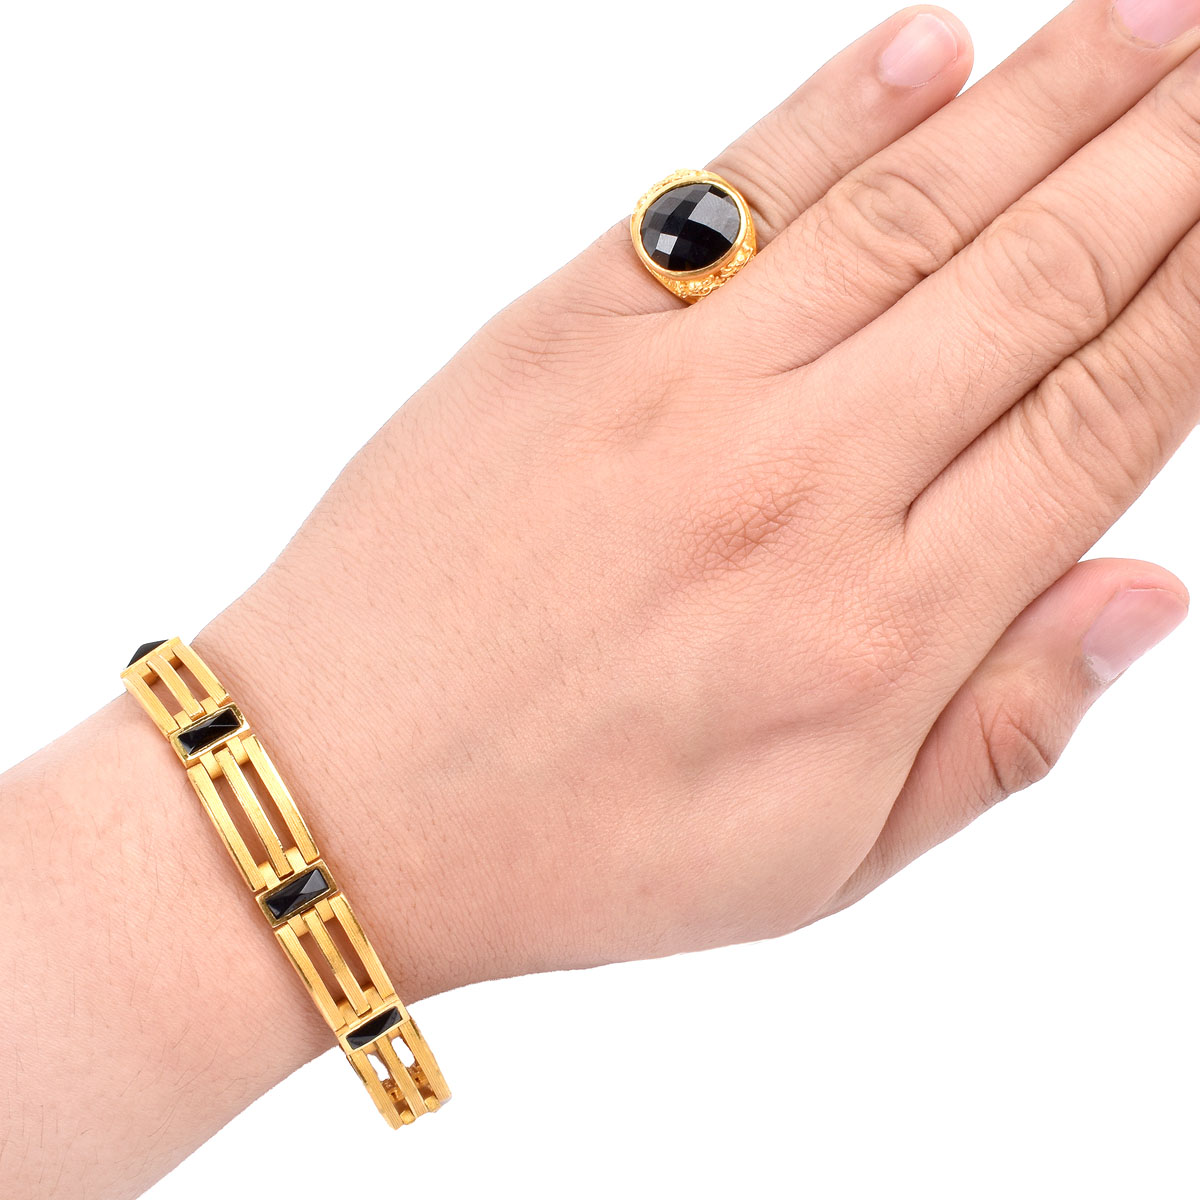 Man's Vintage Prima Criss Cross Cut Black Diamond and 24 Karat Yellow Gold Ring together with Prima 18 Karat Yellow Gold and Black Onyx Bracelet. Signed.